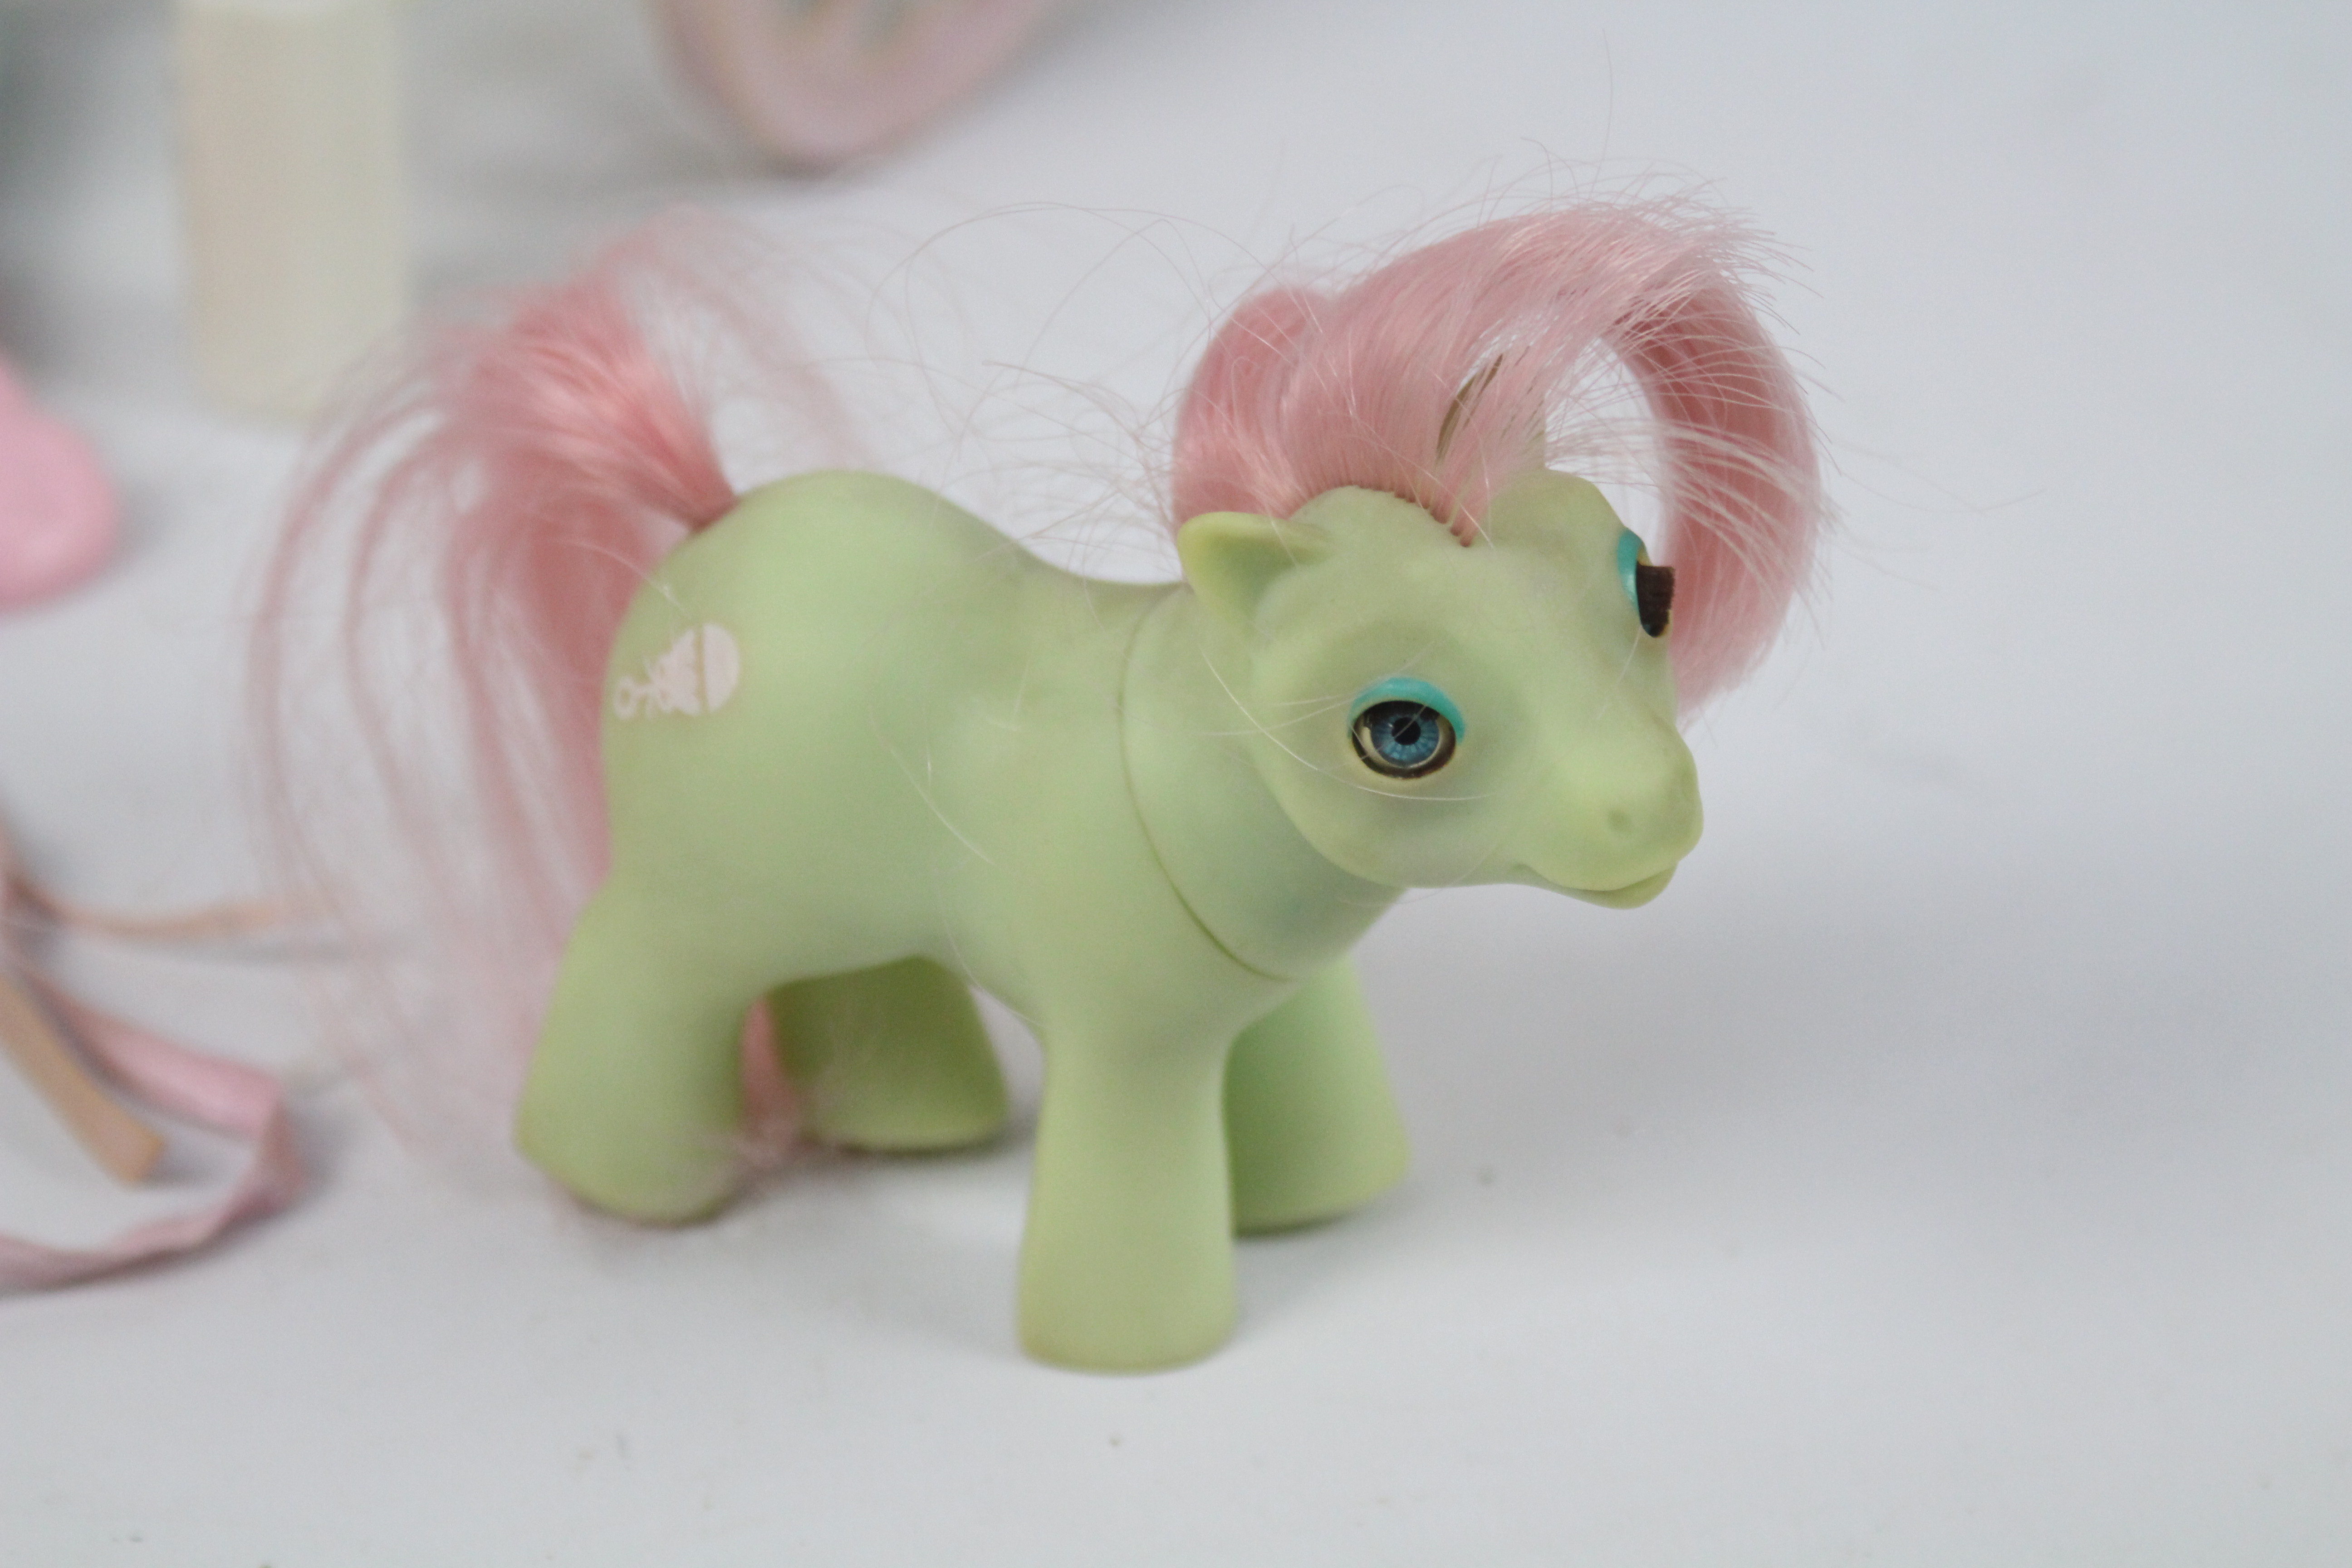 My Little Pony, Baby Buggy - Comes with a light green Baby Cuddles pony with Beddy Bye Eyes, - Image 3 of 3